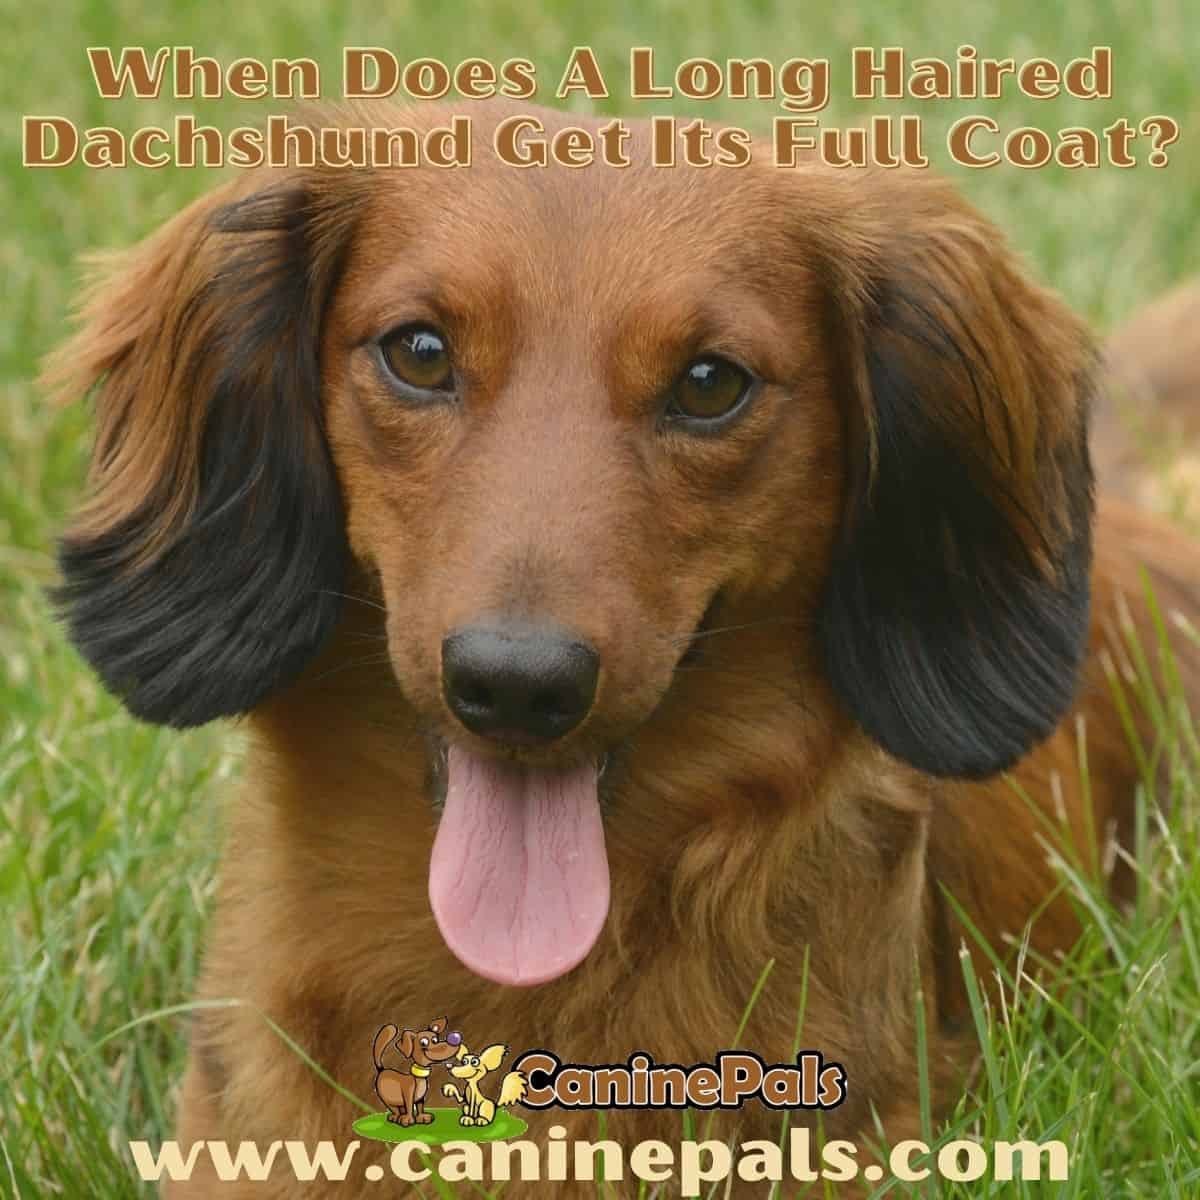 When Does A Long Haired Dachshund Get Its Full Coat? - Canine Pals